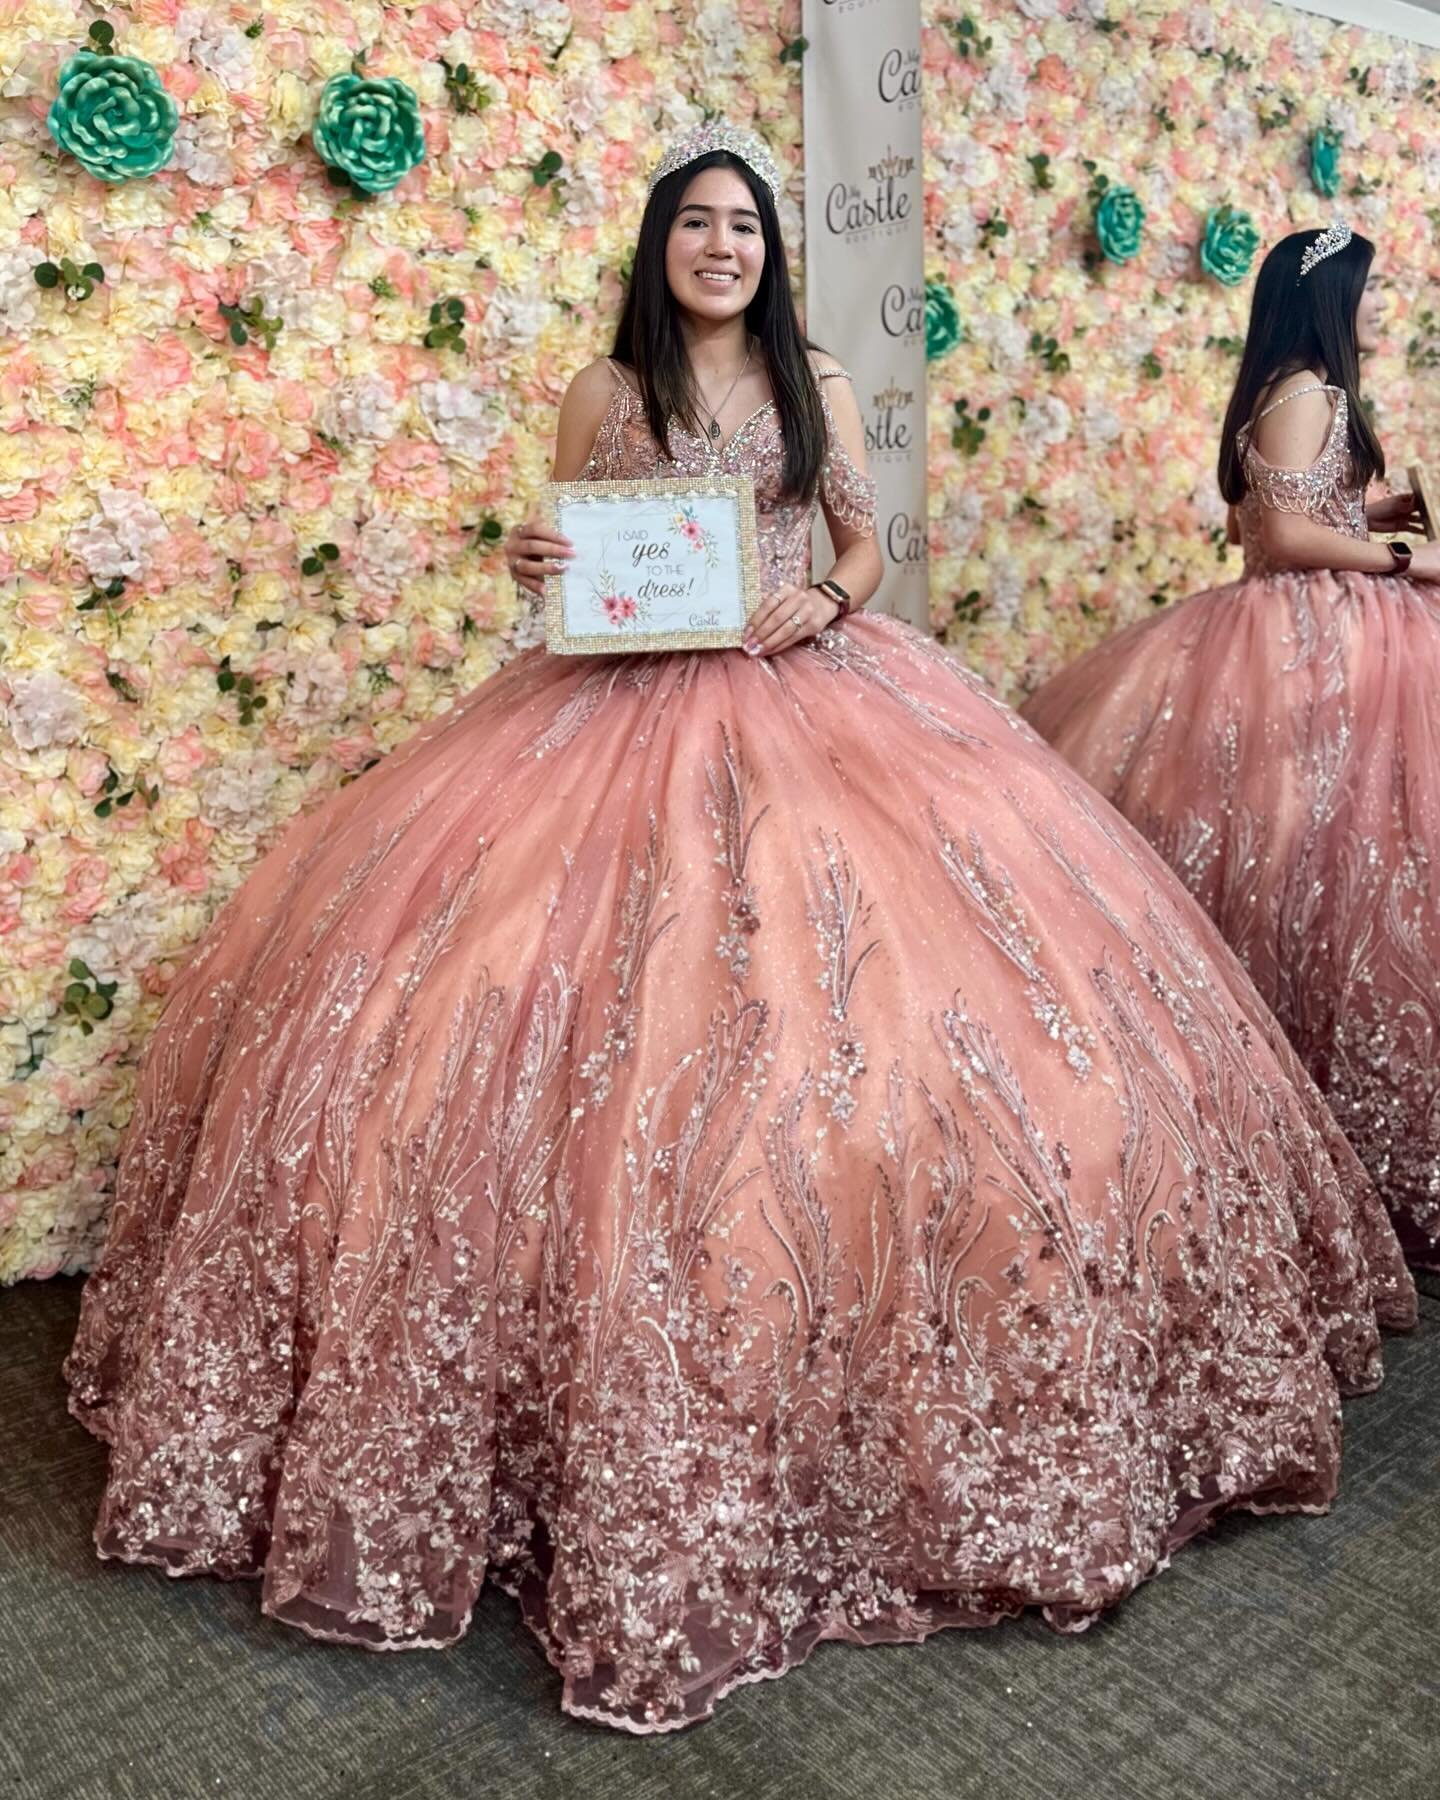 She said yes to her dress! 💕
✨
✨✨
✨✨✨
✨✨✨✨
✨✨✨✨✨
✨✨✨✨
✨✨✨
✨✨
✨
#mycastleboutique #pearland #pearlandtx #quincea&ntilde;era #quinceanera #quince #ballgown #sweet15 #dresses #partydress #vestidosdequince #xv #prom #dress #quinceaneradress #quincea&nti